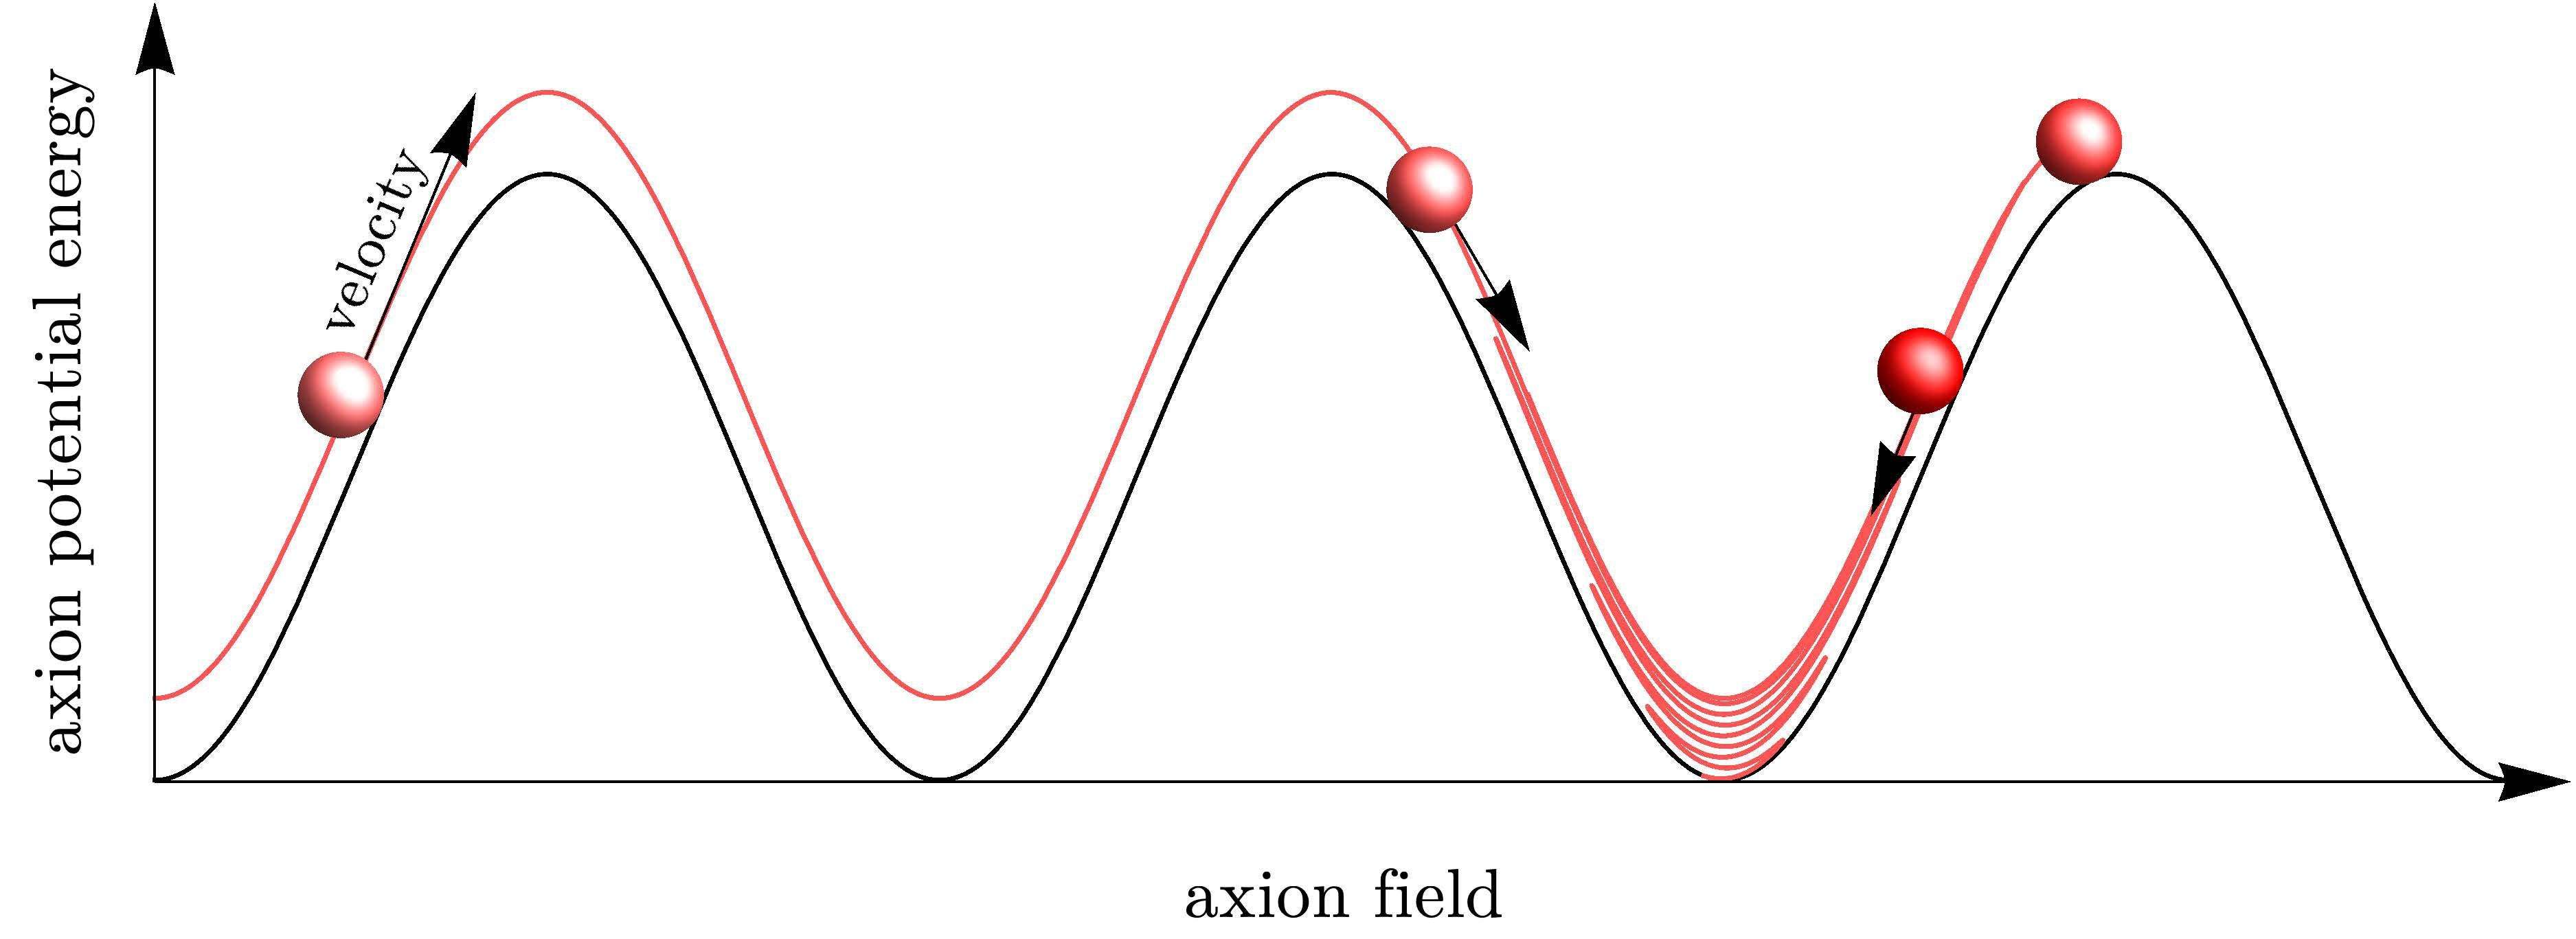 image for Case for Axion Origin of Dark Matter Gains Traction